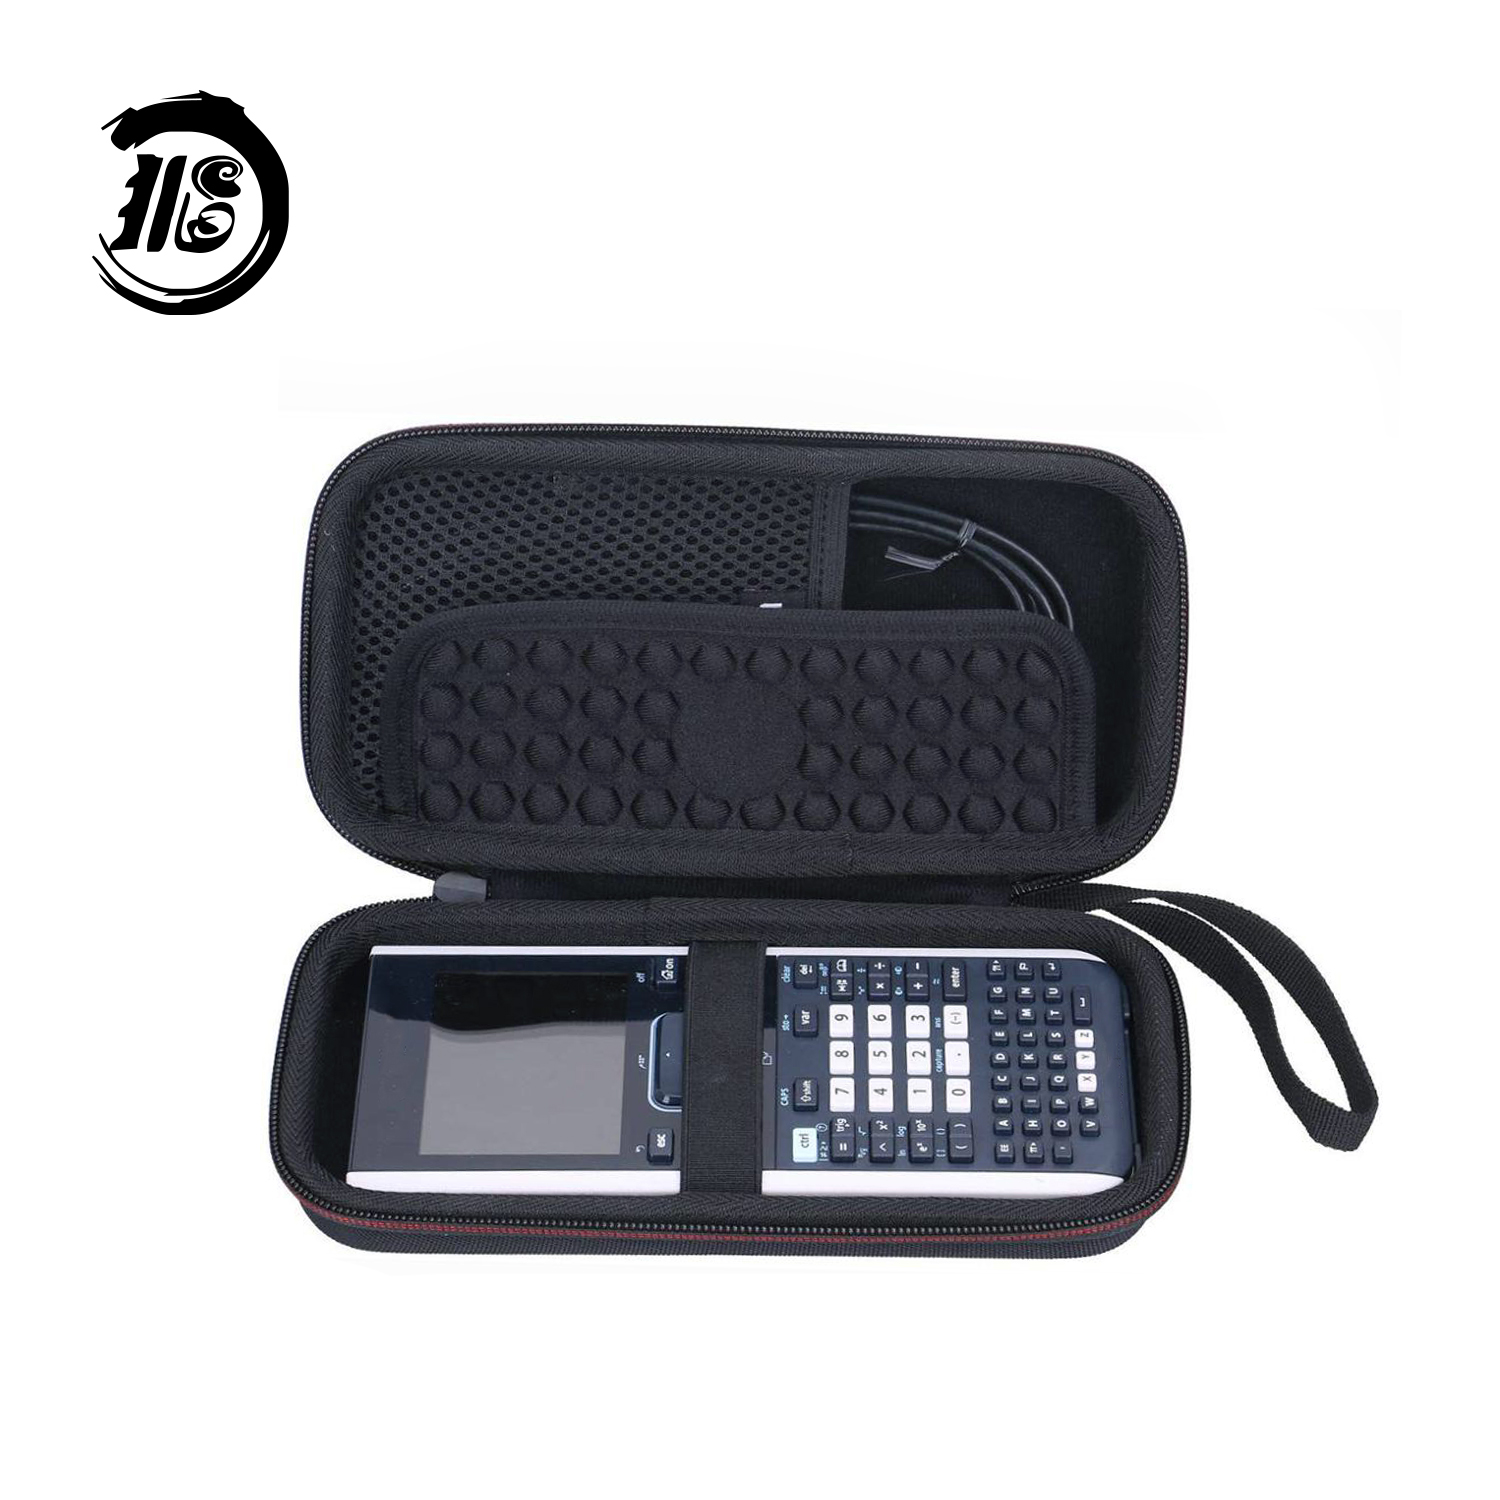 Portable Carry Case EVA Hard Case Travel Case for Electronic Calculator and Accessories